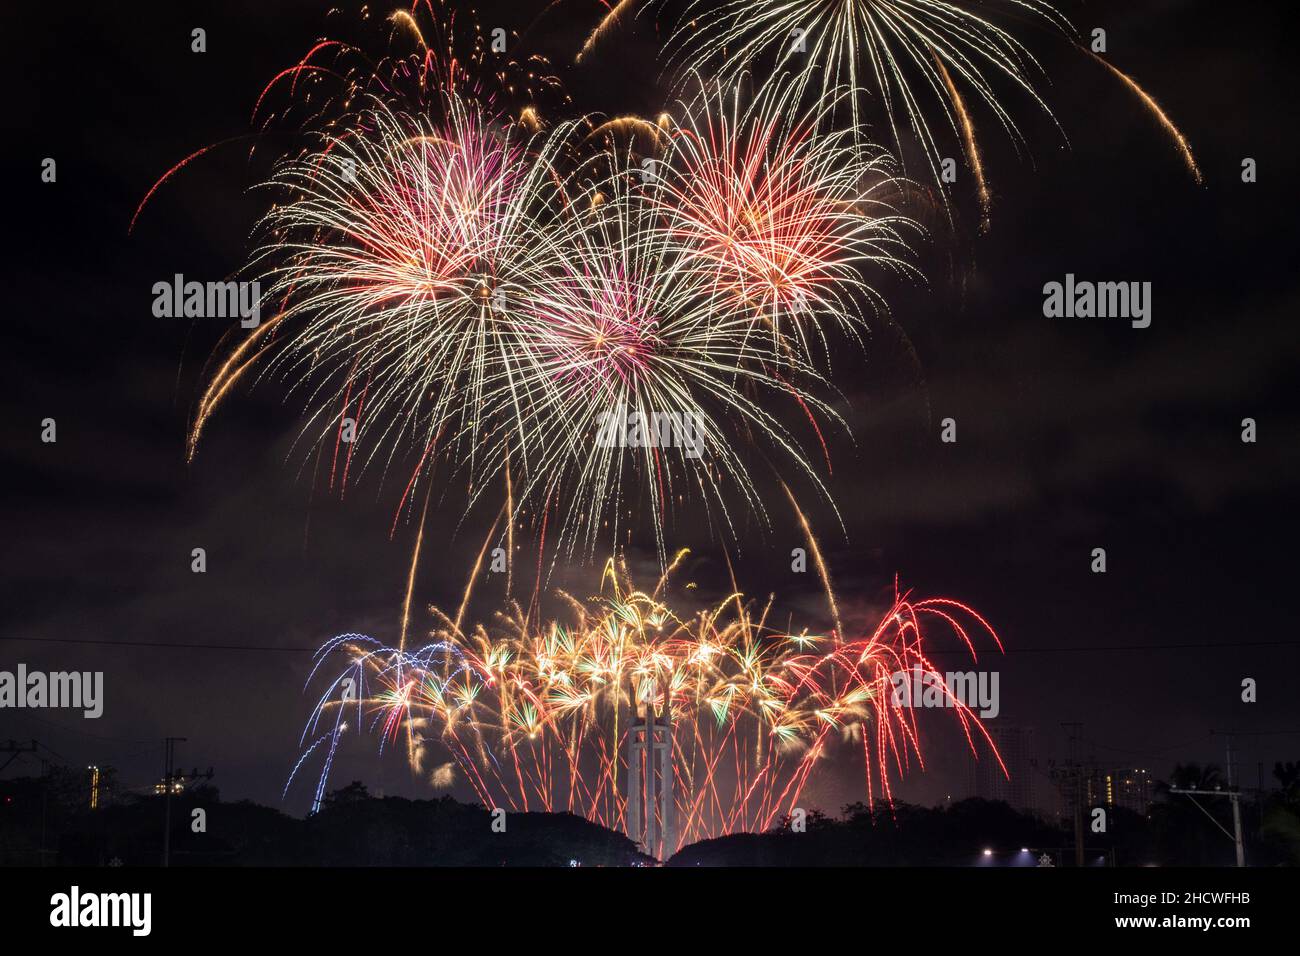 Manila, Philippines. January 1st, 2022. A fireworks display lights up the sky over the Quezon City Memorial Circle to usher in the New Year. Stock Photo